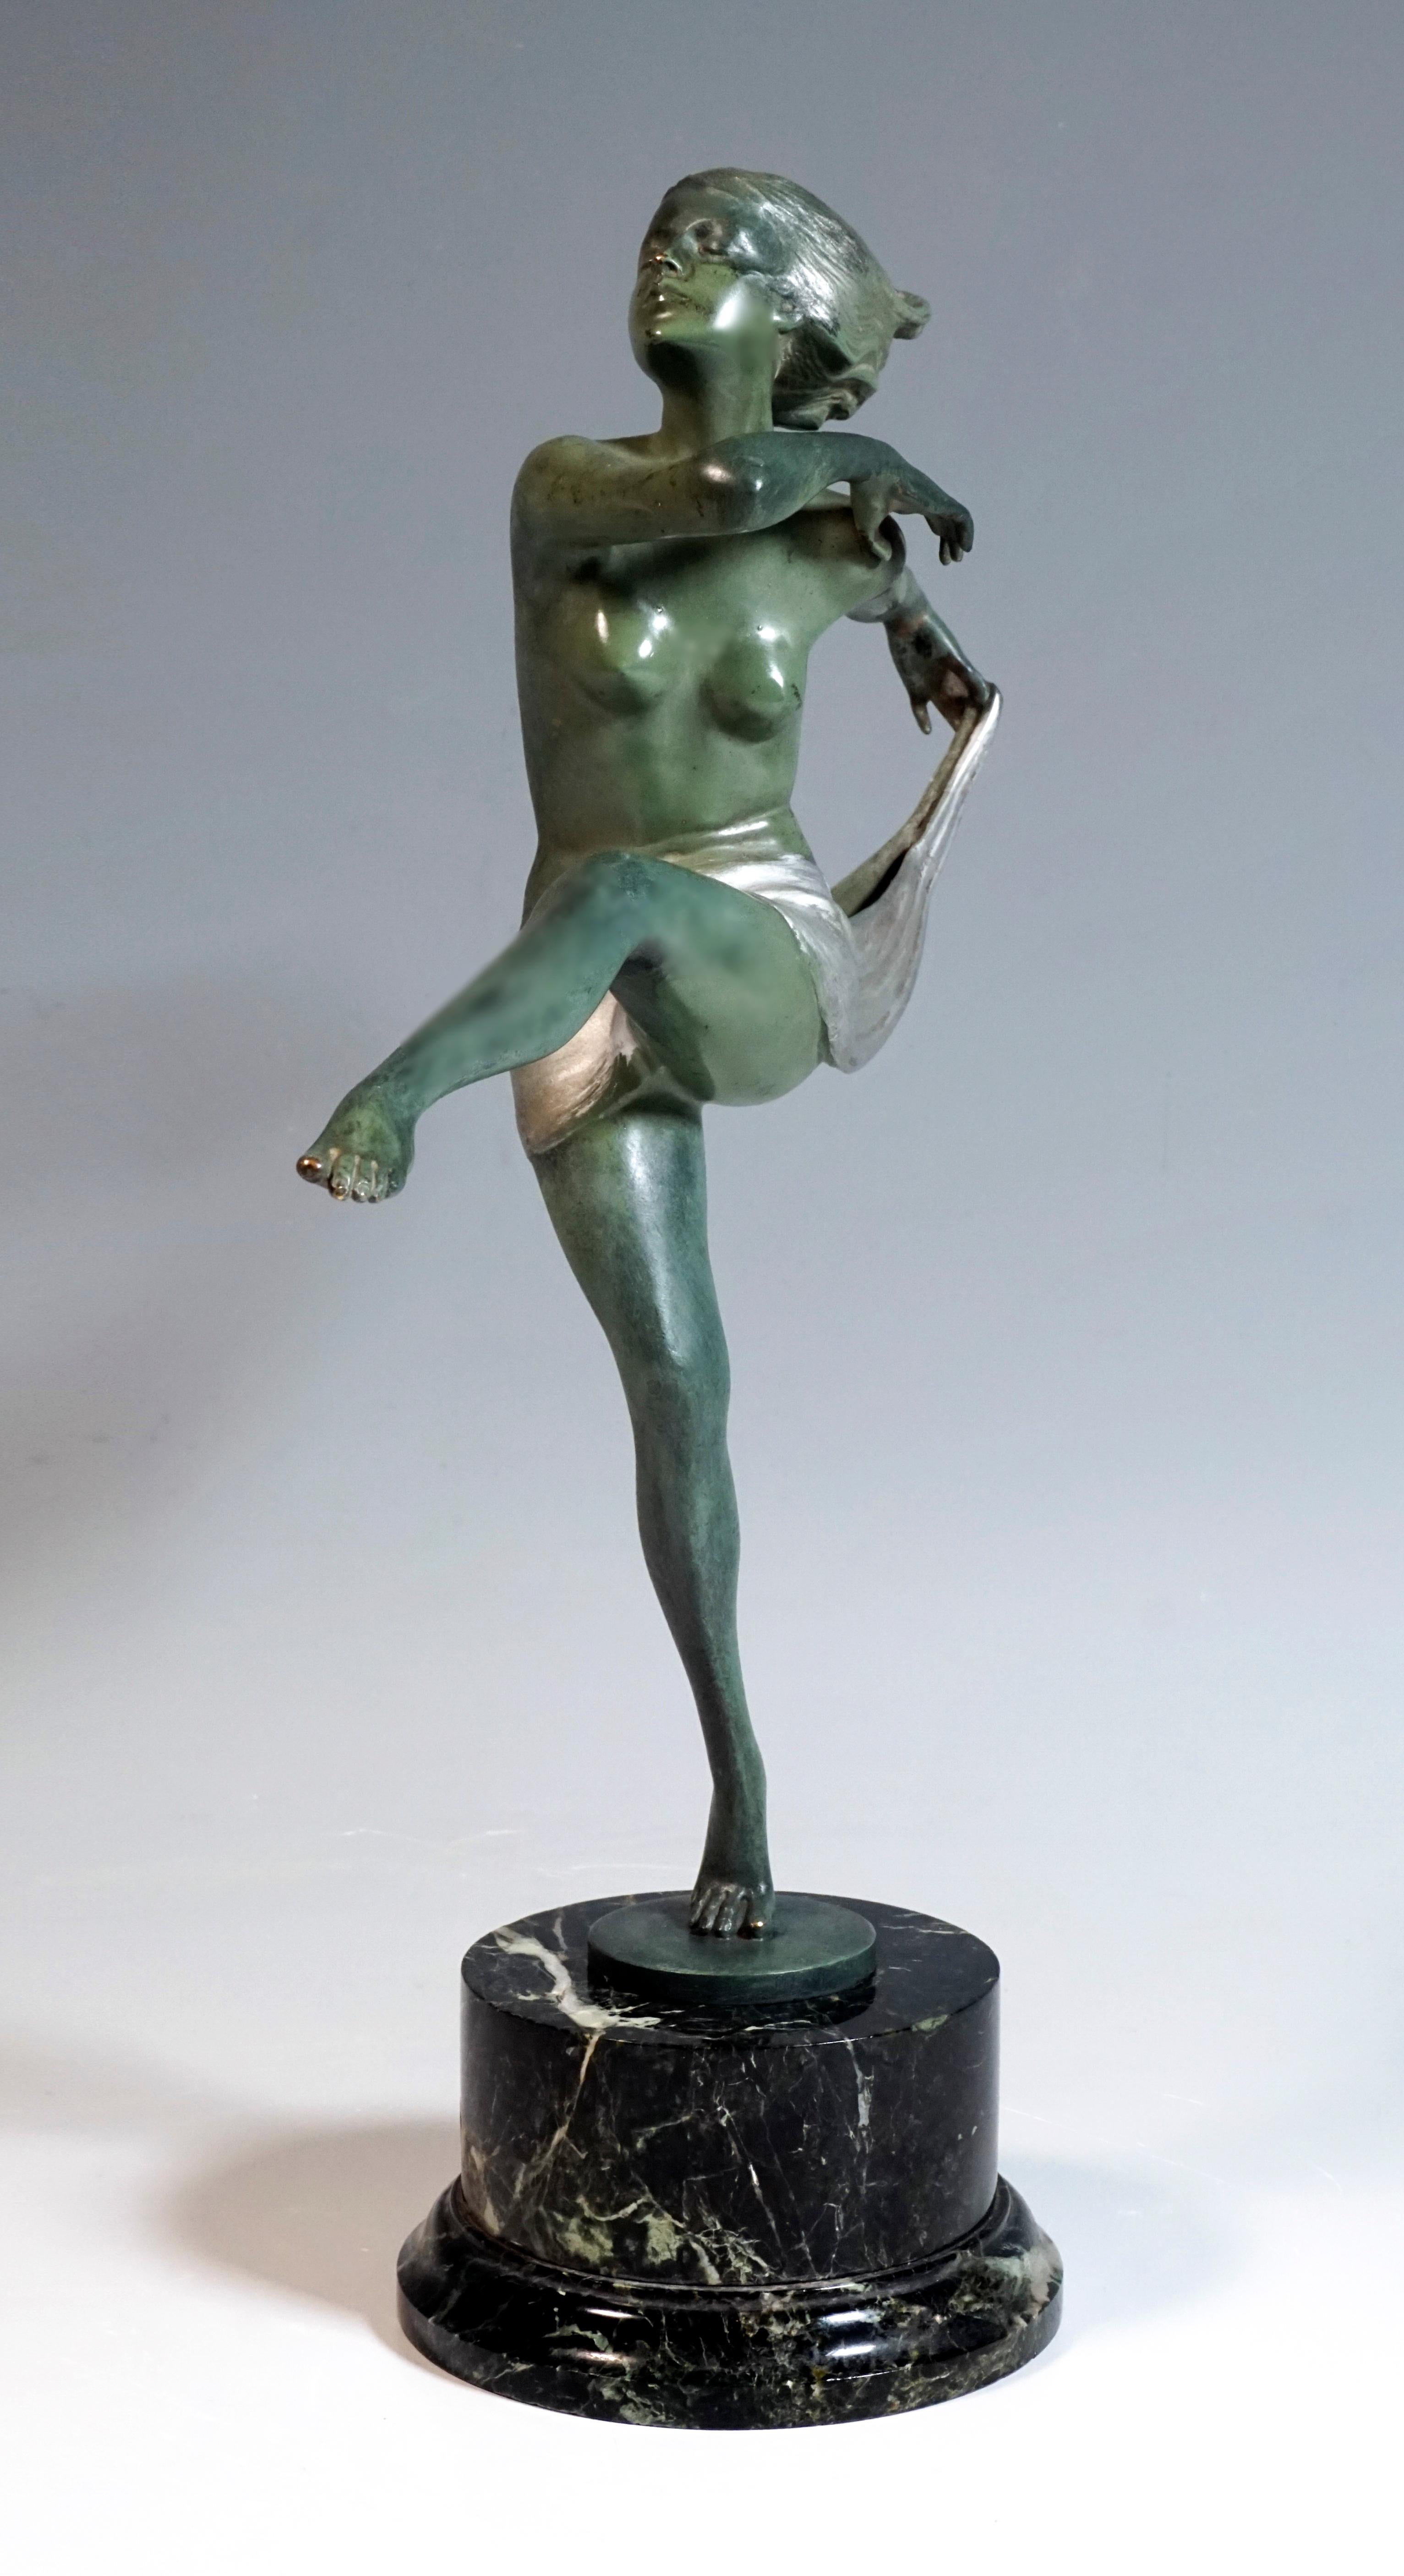 Excellent piece of Viennese Bronze Art

The graceful, bare dancer with short, full hair rises on her right toes, elegantly stretching her left leg forward, right arm horizontally, bending her hand next to her left shoulder, stretching her left arm